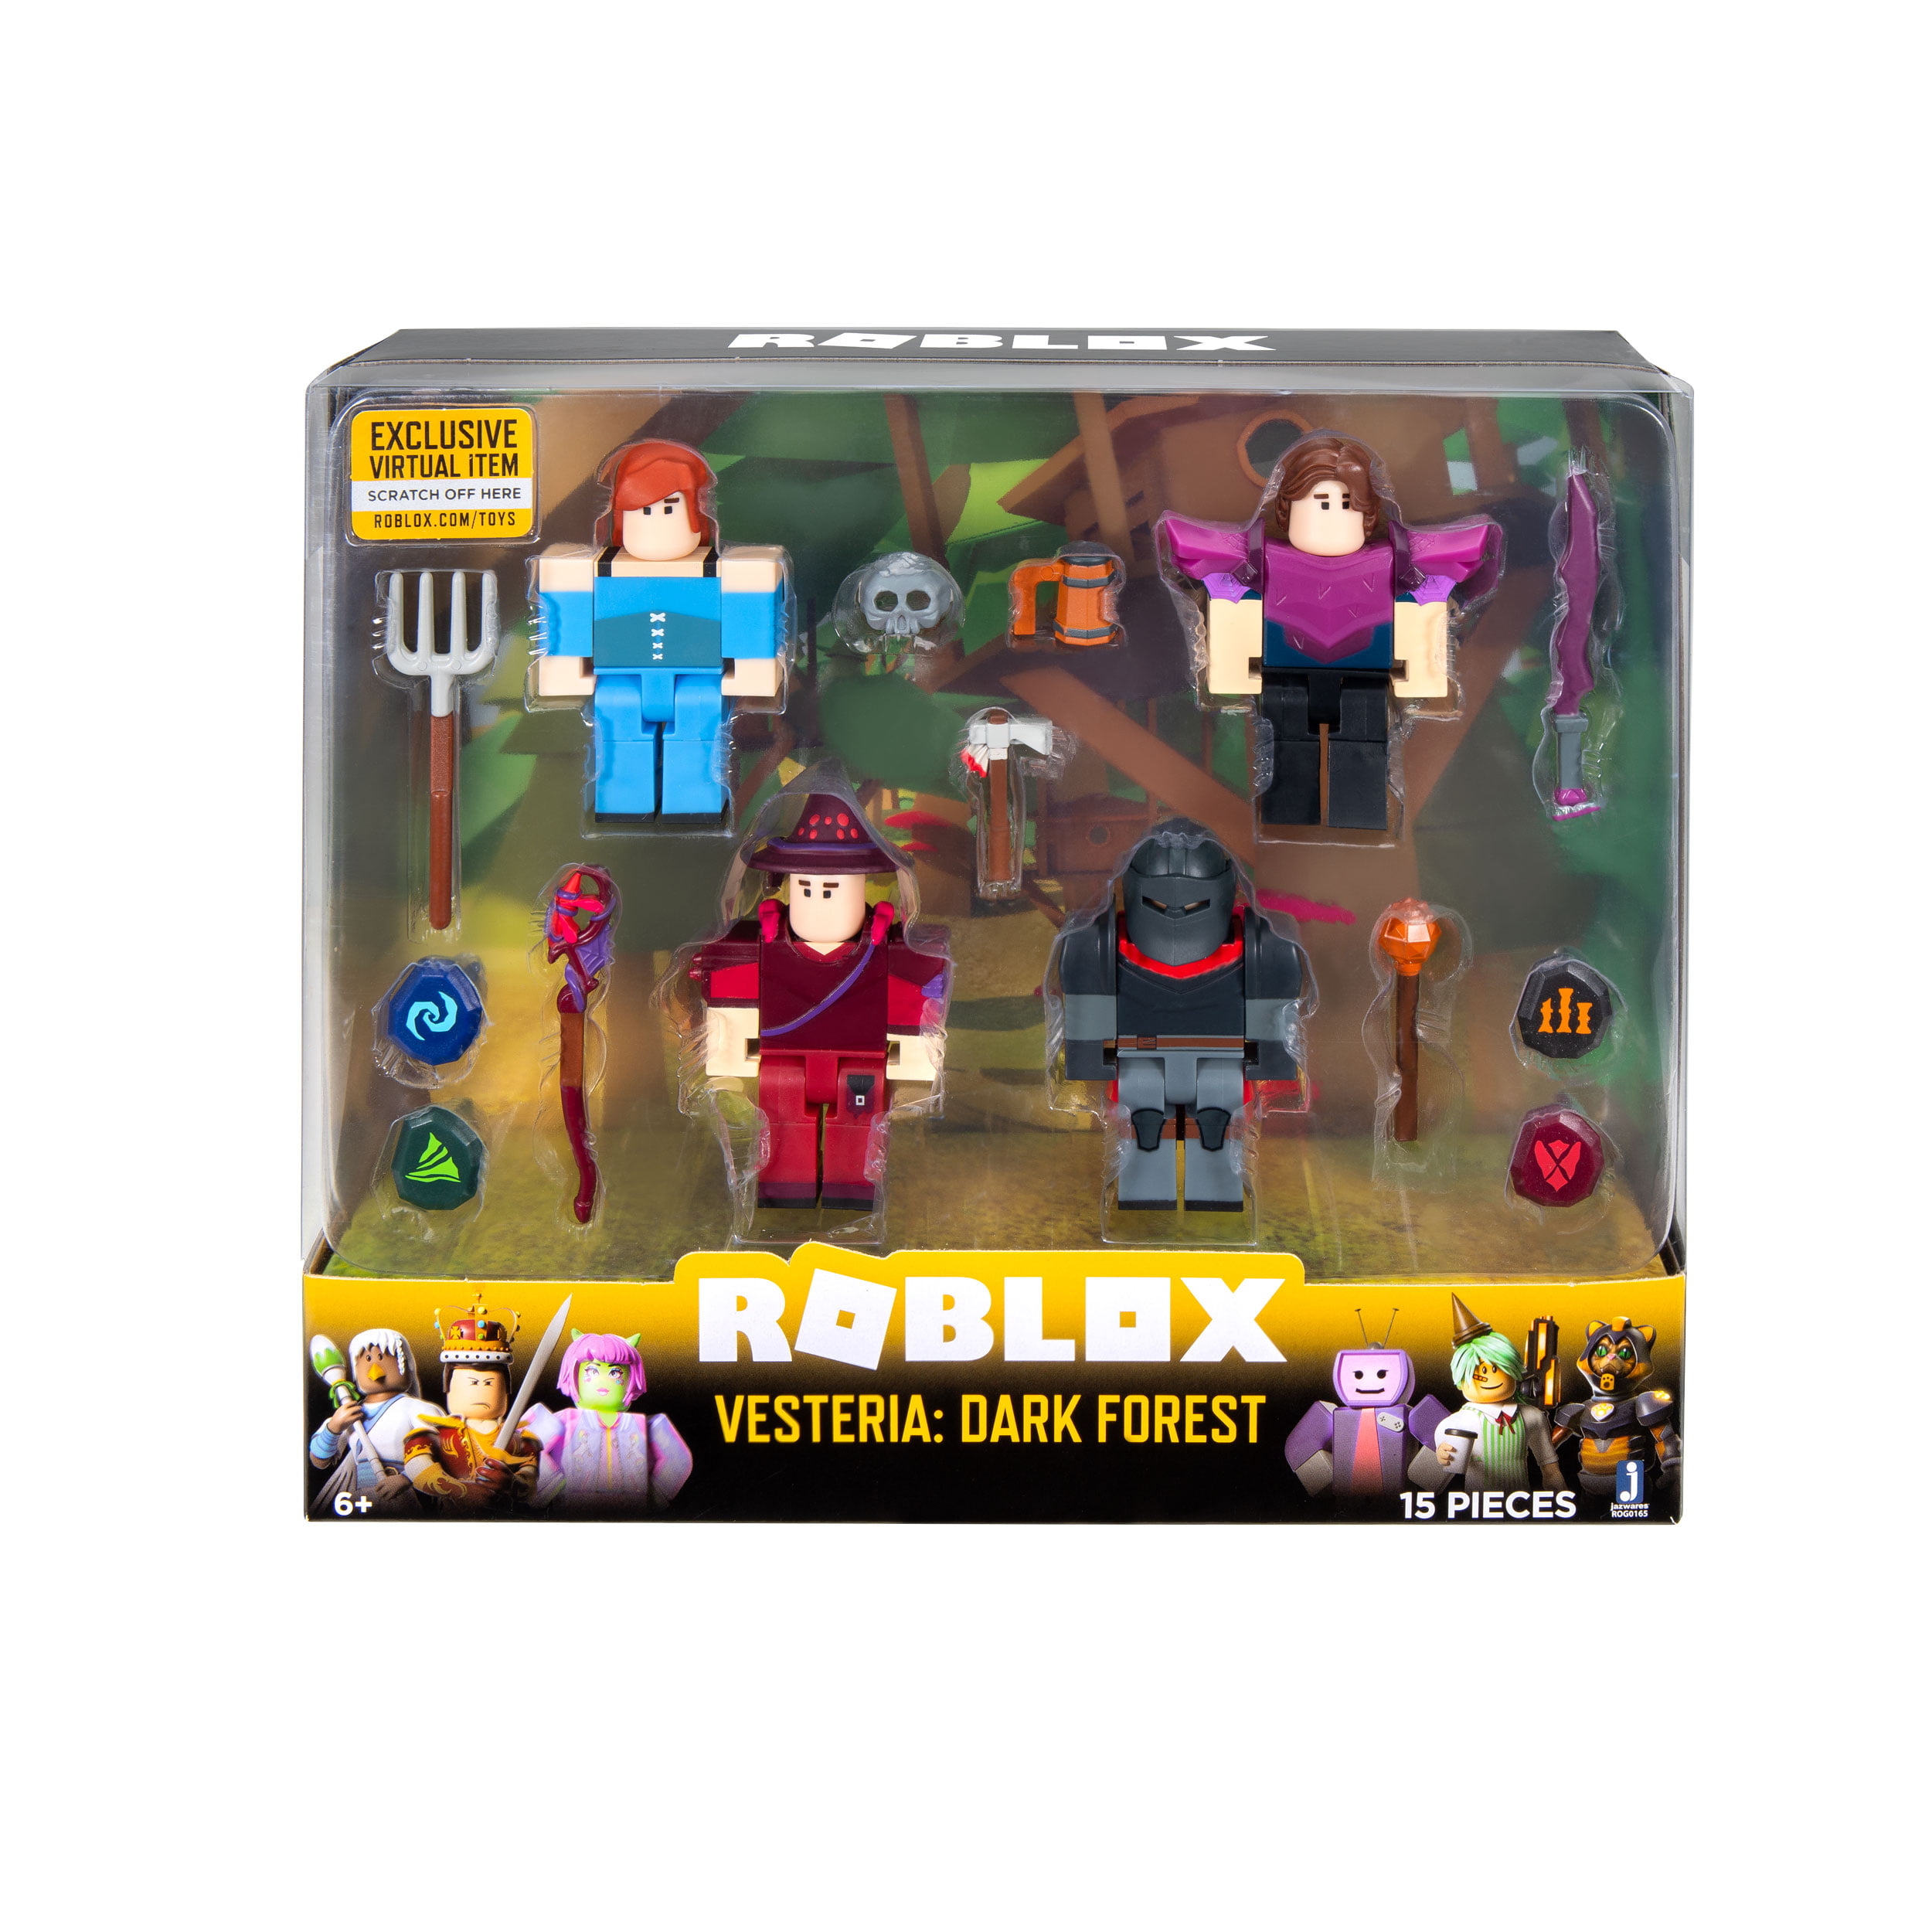 Roblox Celebrity Collection Vesteria Dark Forest Four Figure Pack Includes Exclusive Virtual Item Walmart Com Walmart Com - map of vesteria roblox